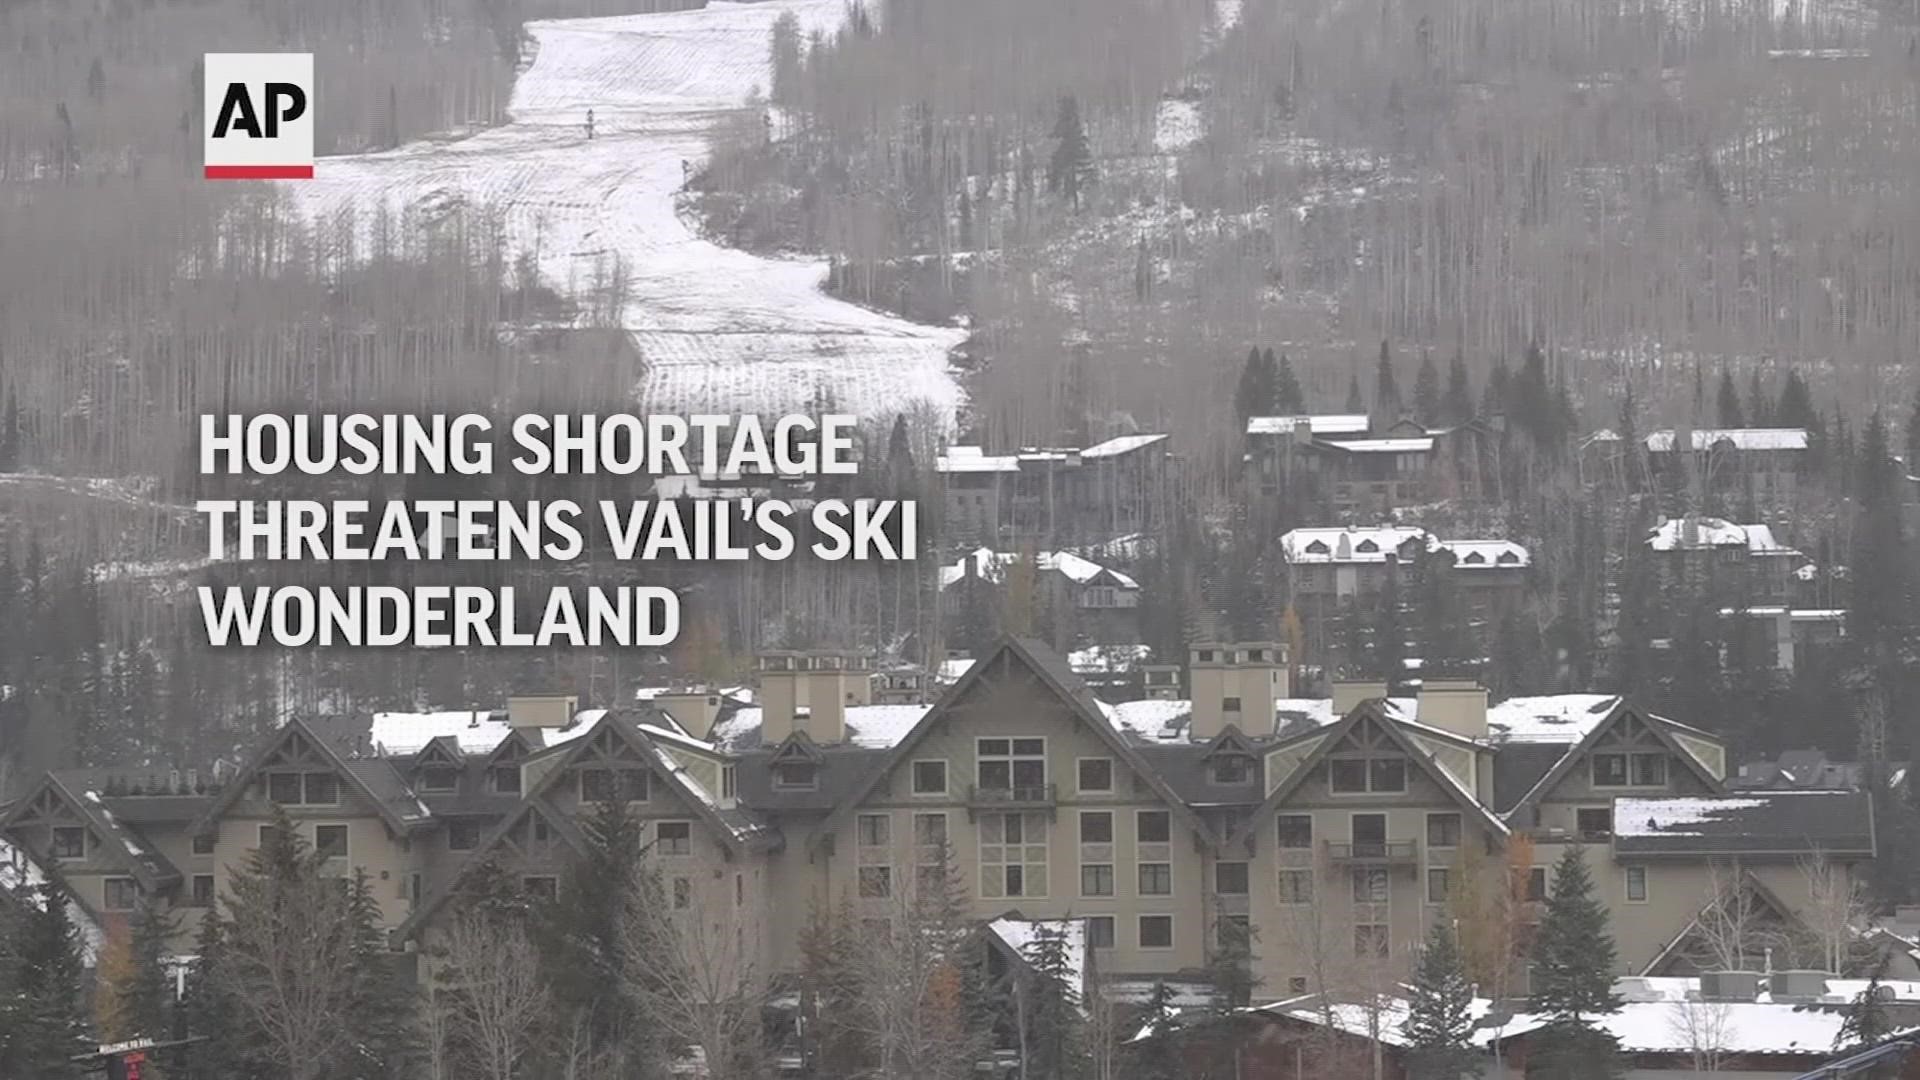 There's lack of affordable housing around the resort town of Vail, Colorado where steep hillsides, public land and sensitive wild inhibit new construction.